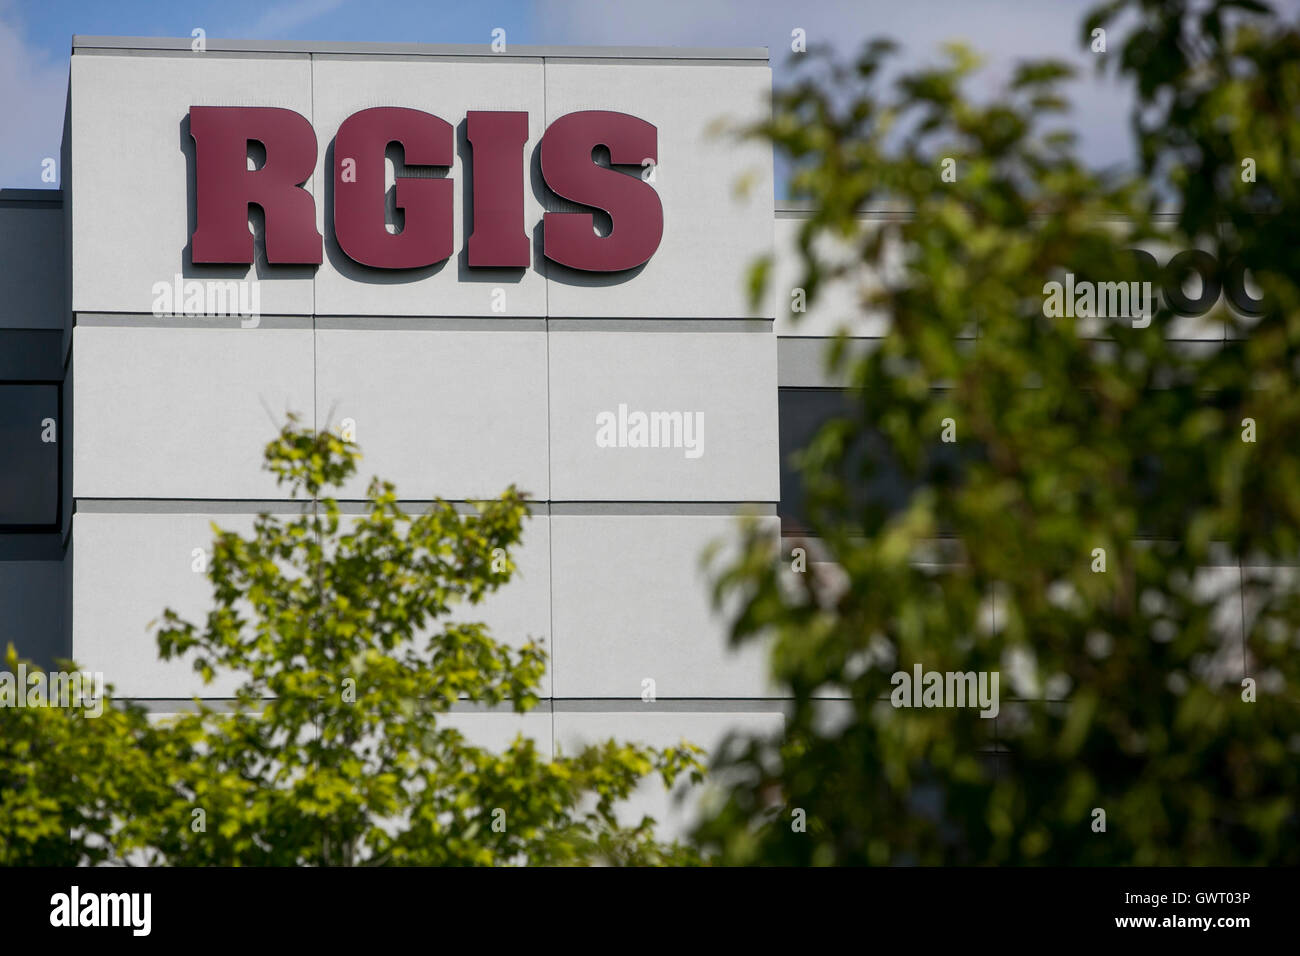 A logo sign outside of the headquarters of RGIS Inventory Specialists in Auburn Hills, Michigan on July 17, 2016. Stock Photo